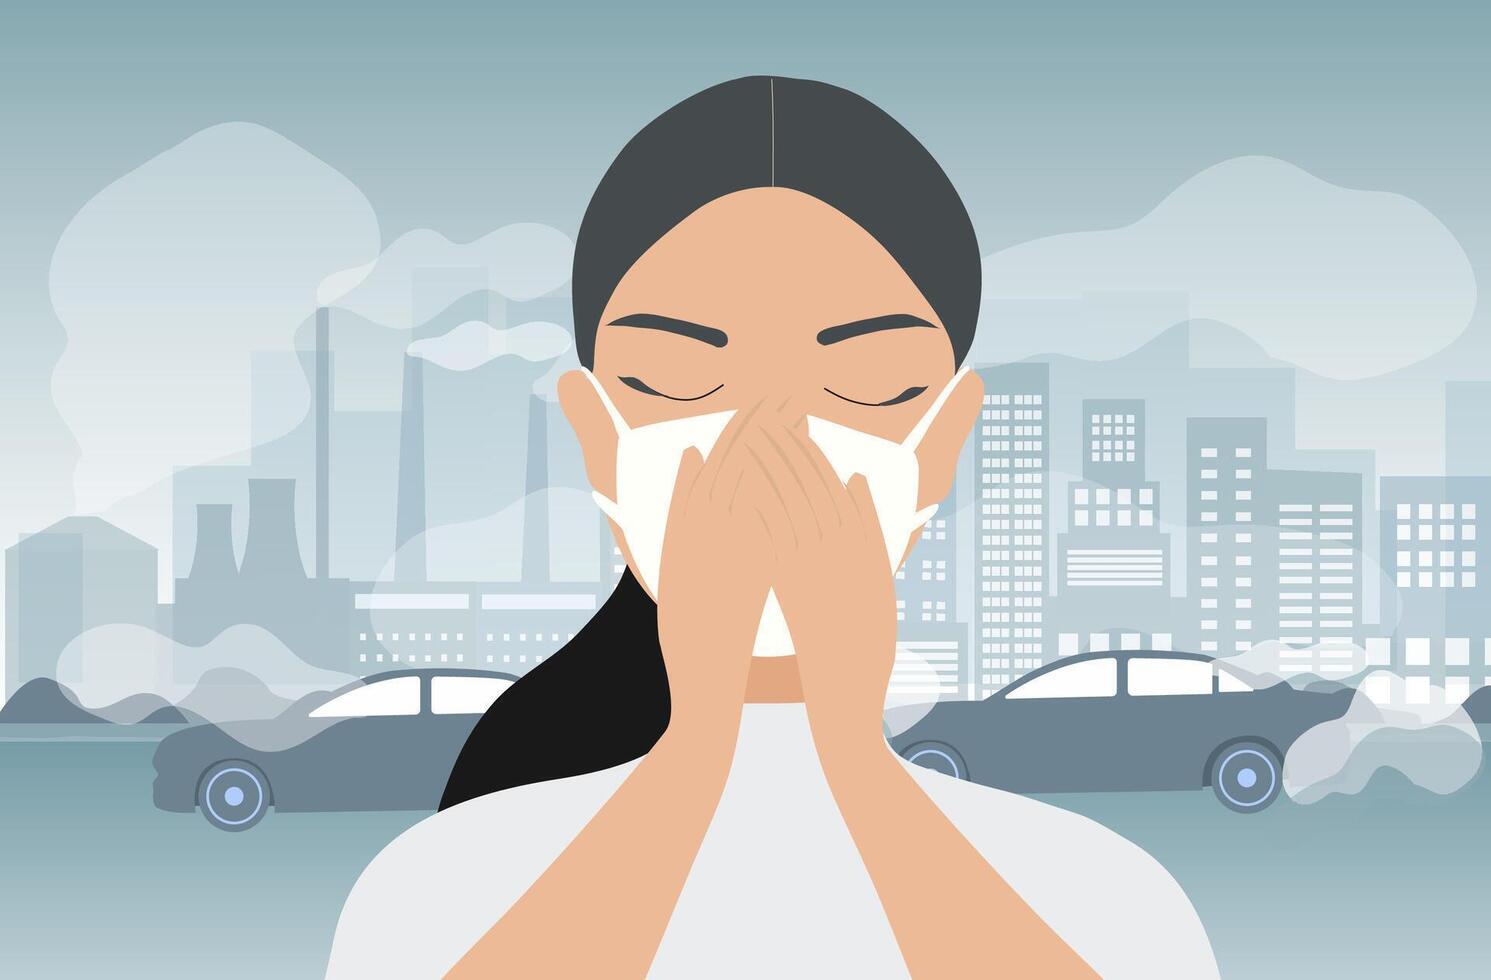 Air pollution, pm 2.5, industry pollution, toxic road smoke clouds and environment pollution, and vehicle carbon dioxide, woman wear face mask vector